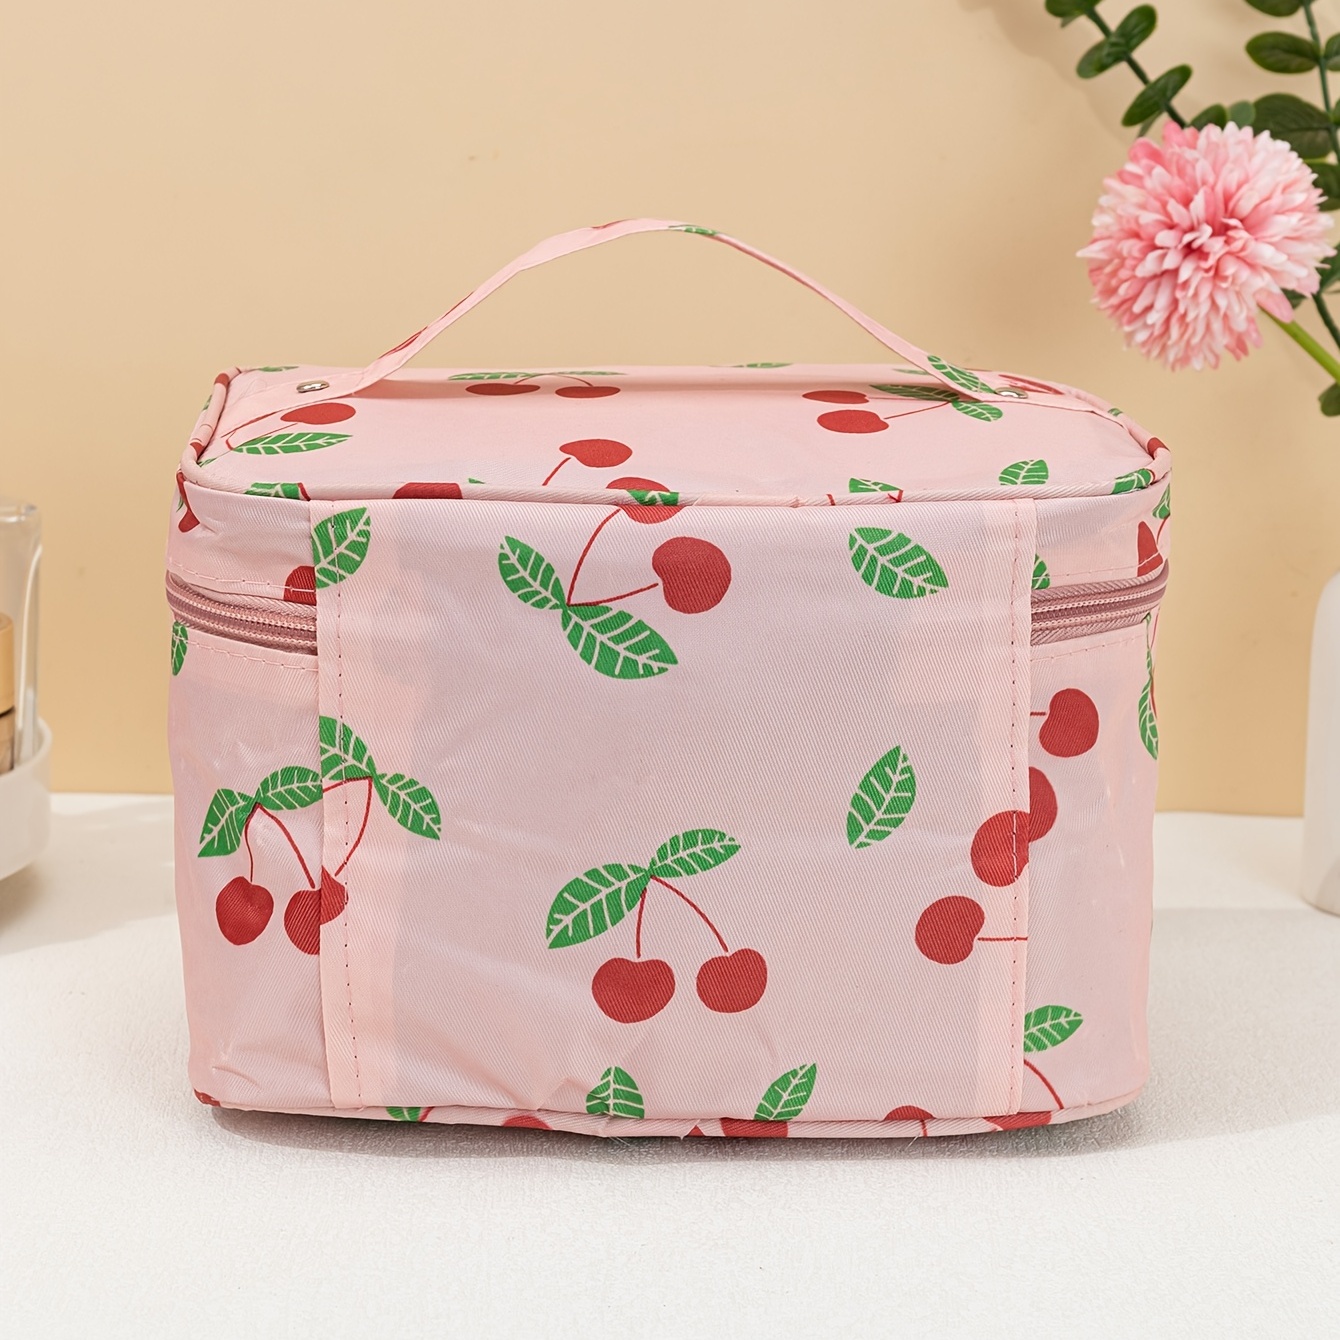  Psaytomey Portable Cosmetic Bag Cherry Blossom Large Capacity  Travel Makeup Bag Drawstring Toiletry Bucket Bags Cosmetics Essentials  Accessories : Beauty & Personal Care